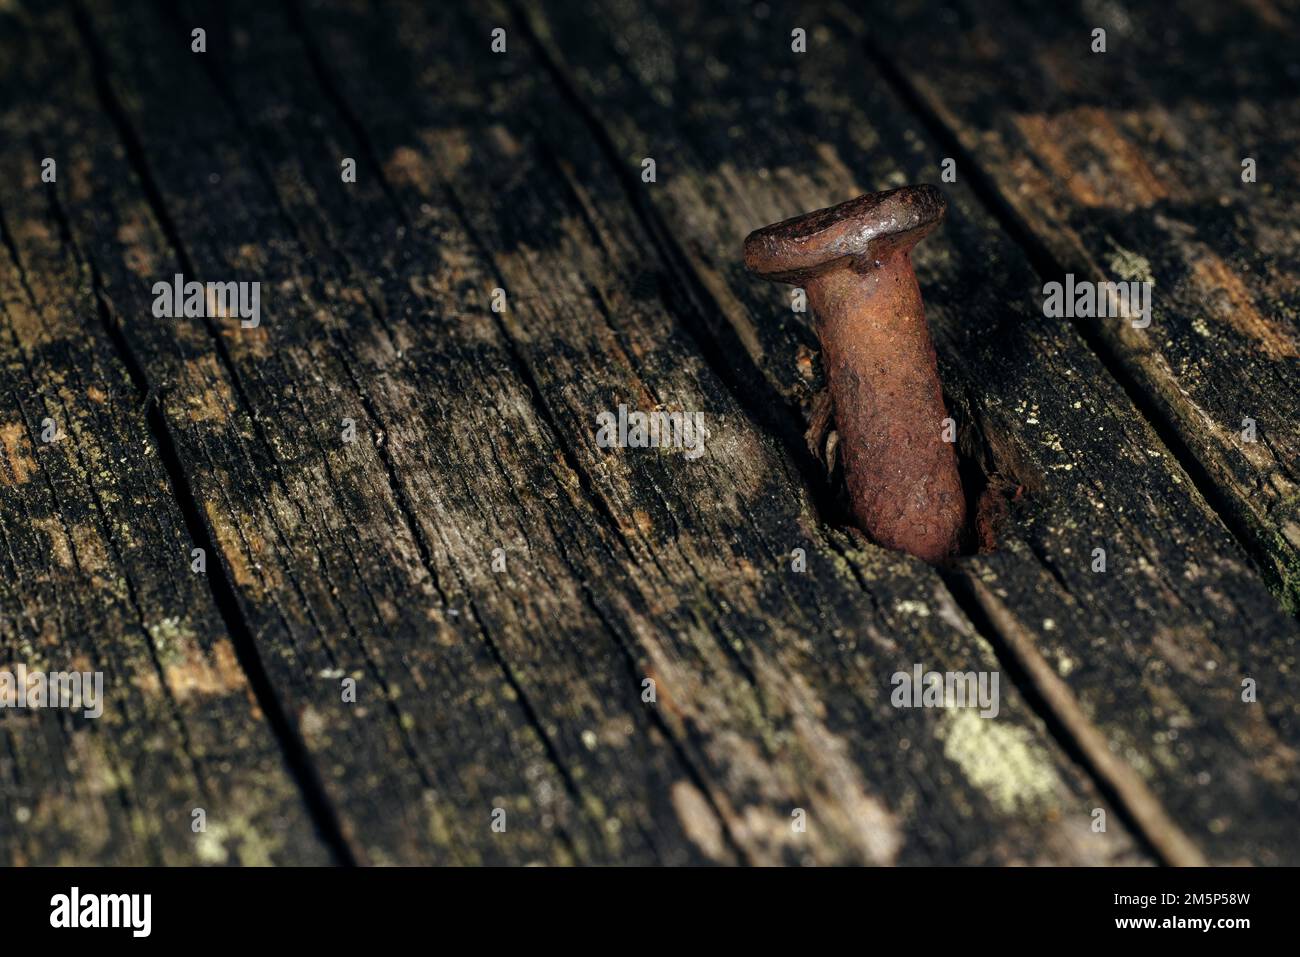 Macrophoto of old rusty croocked nail driven into old wood. Grey-brown background. Stock Photo